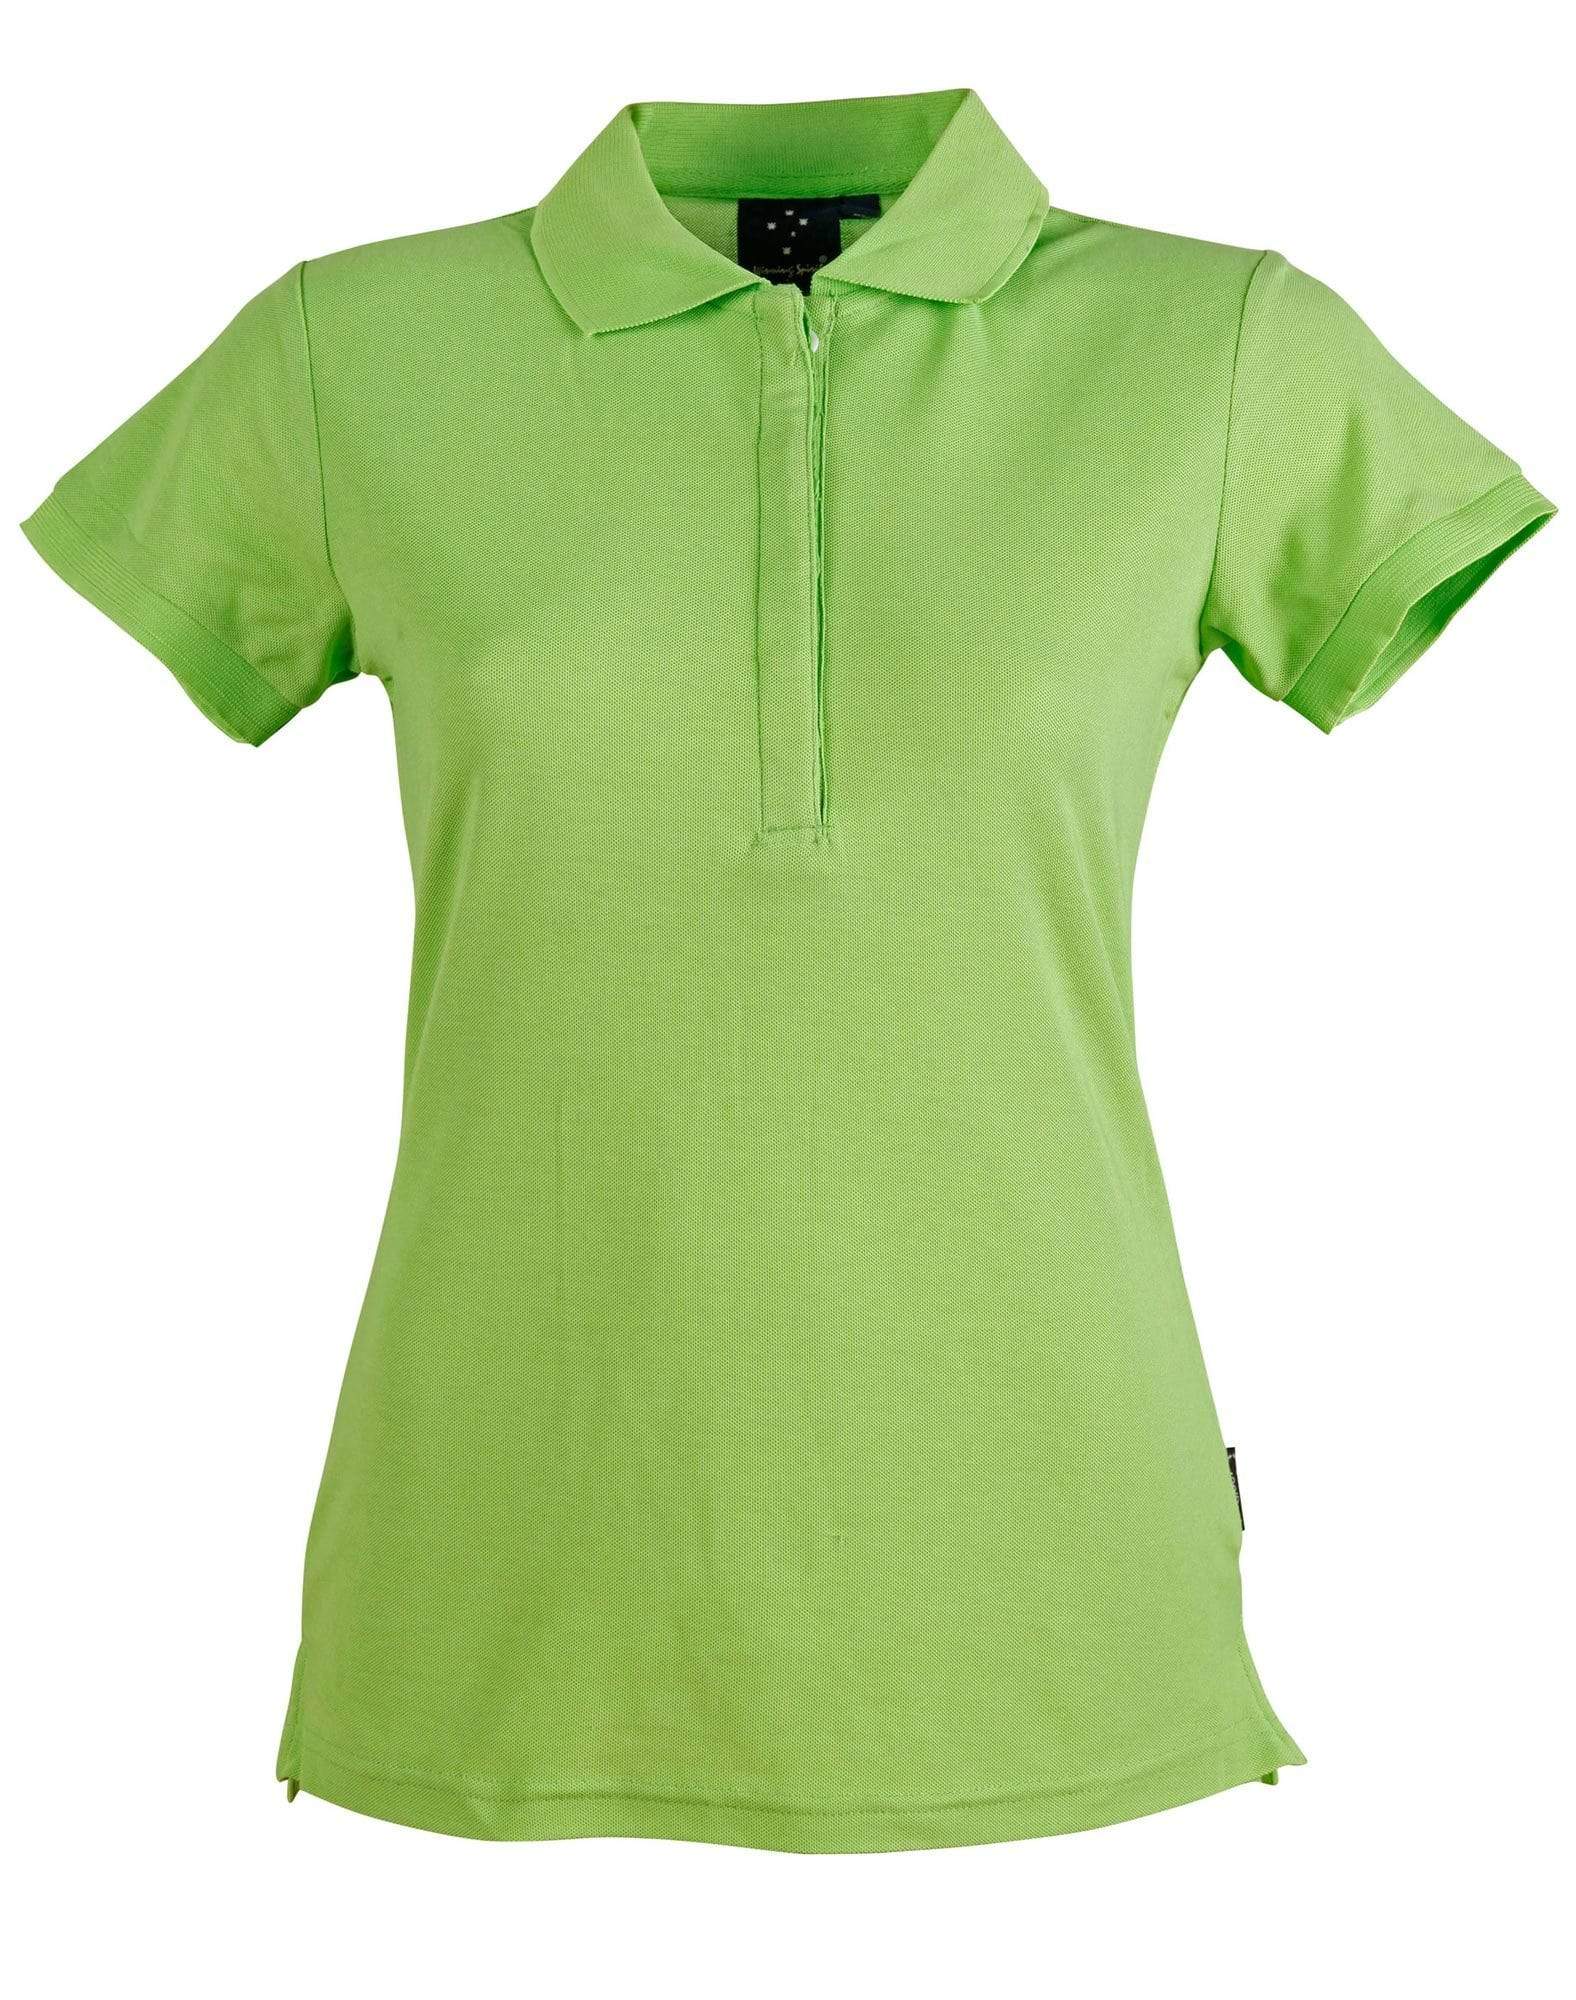 Connection Polo Ladies' Ps64 Casual Wear Winning Spirit Apple Green 8 